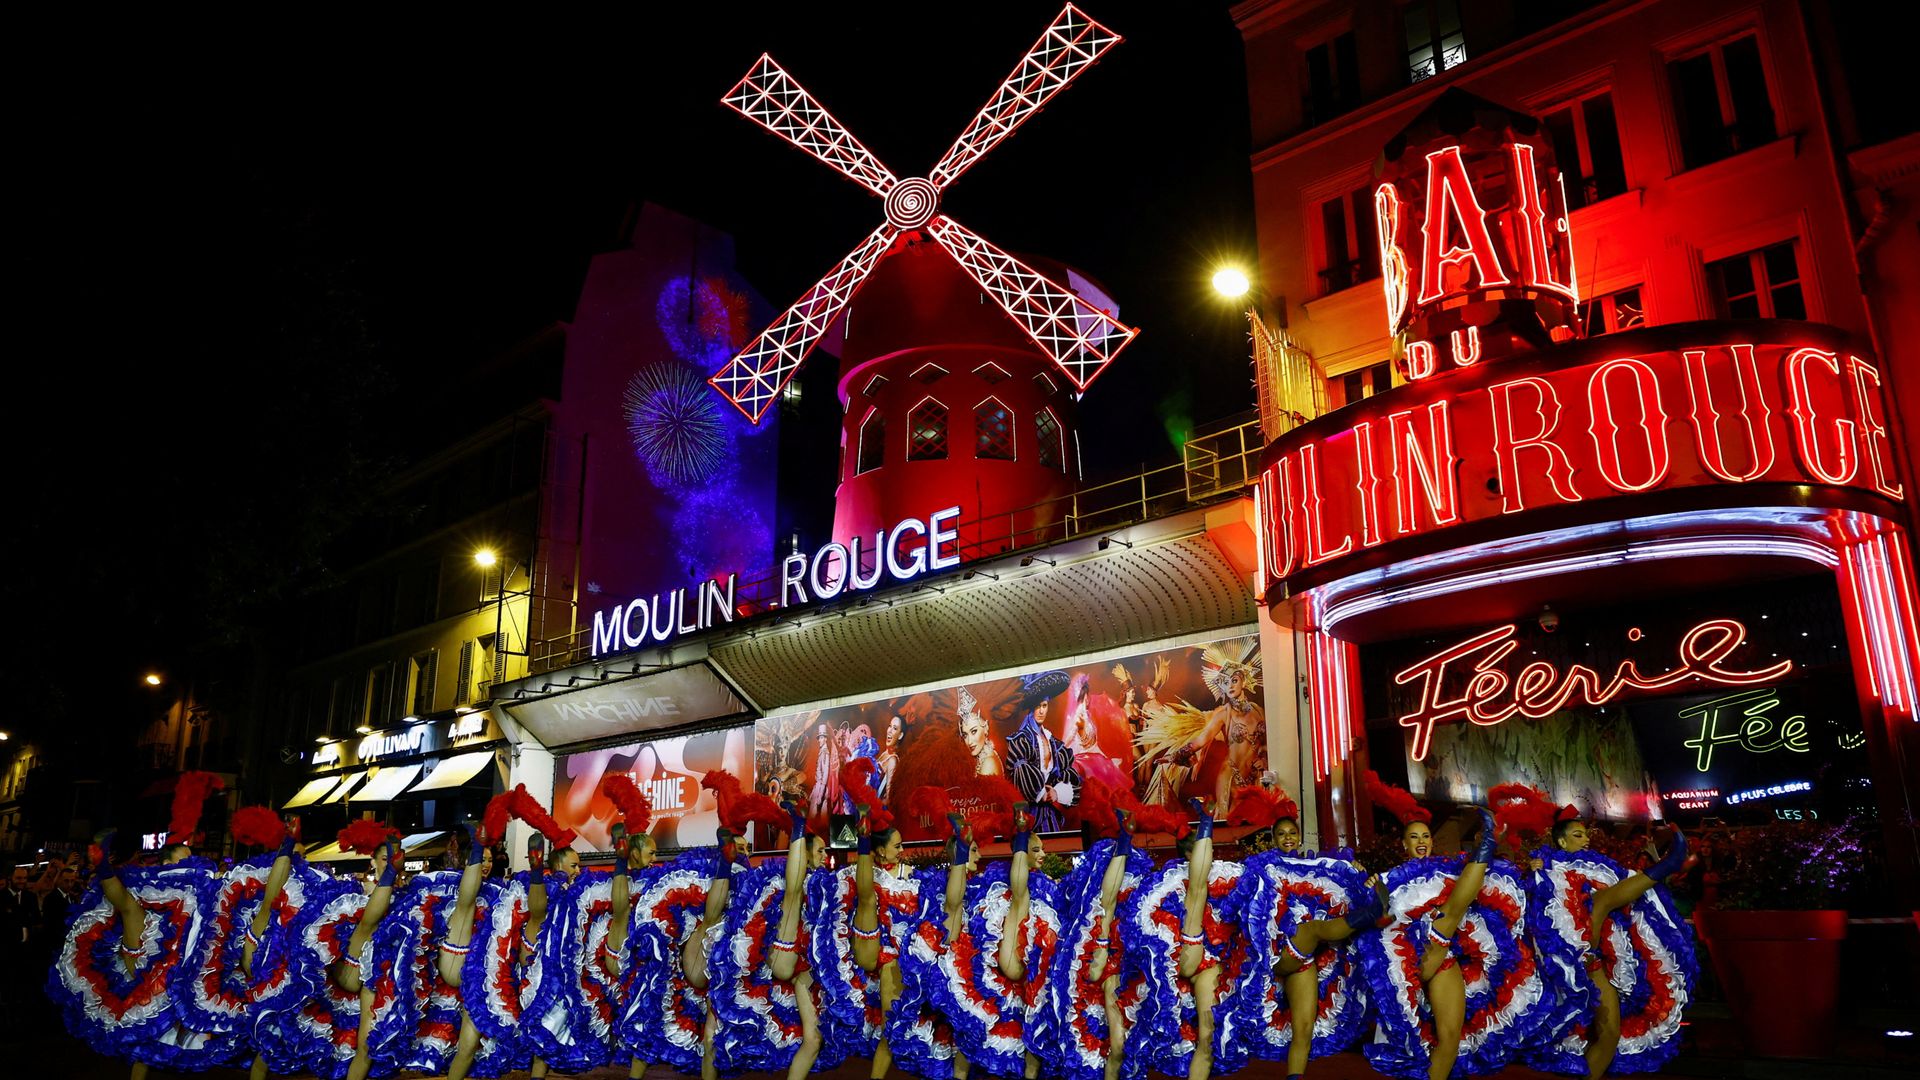 Moulin Rouge windmill restored after collapse – in time for Olympics